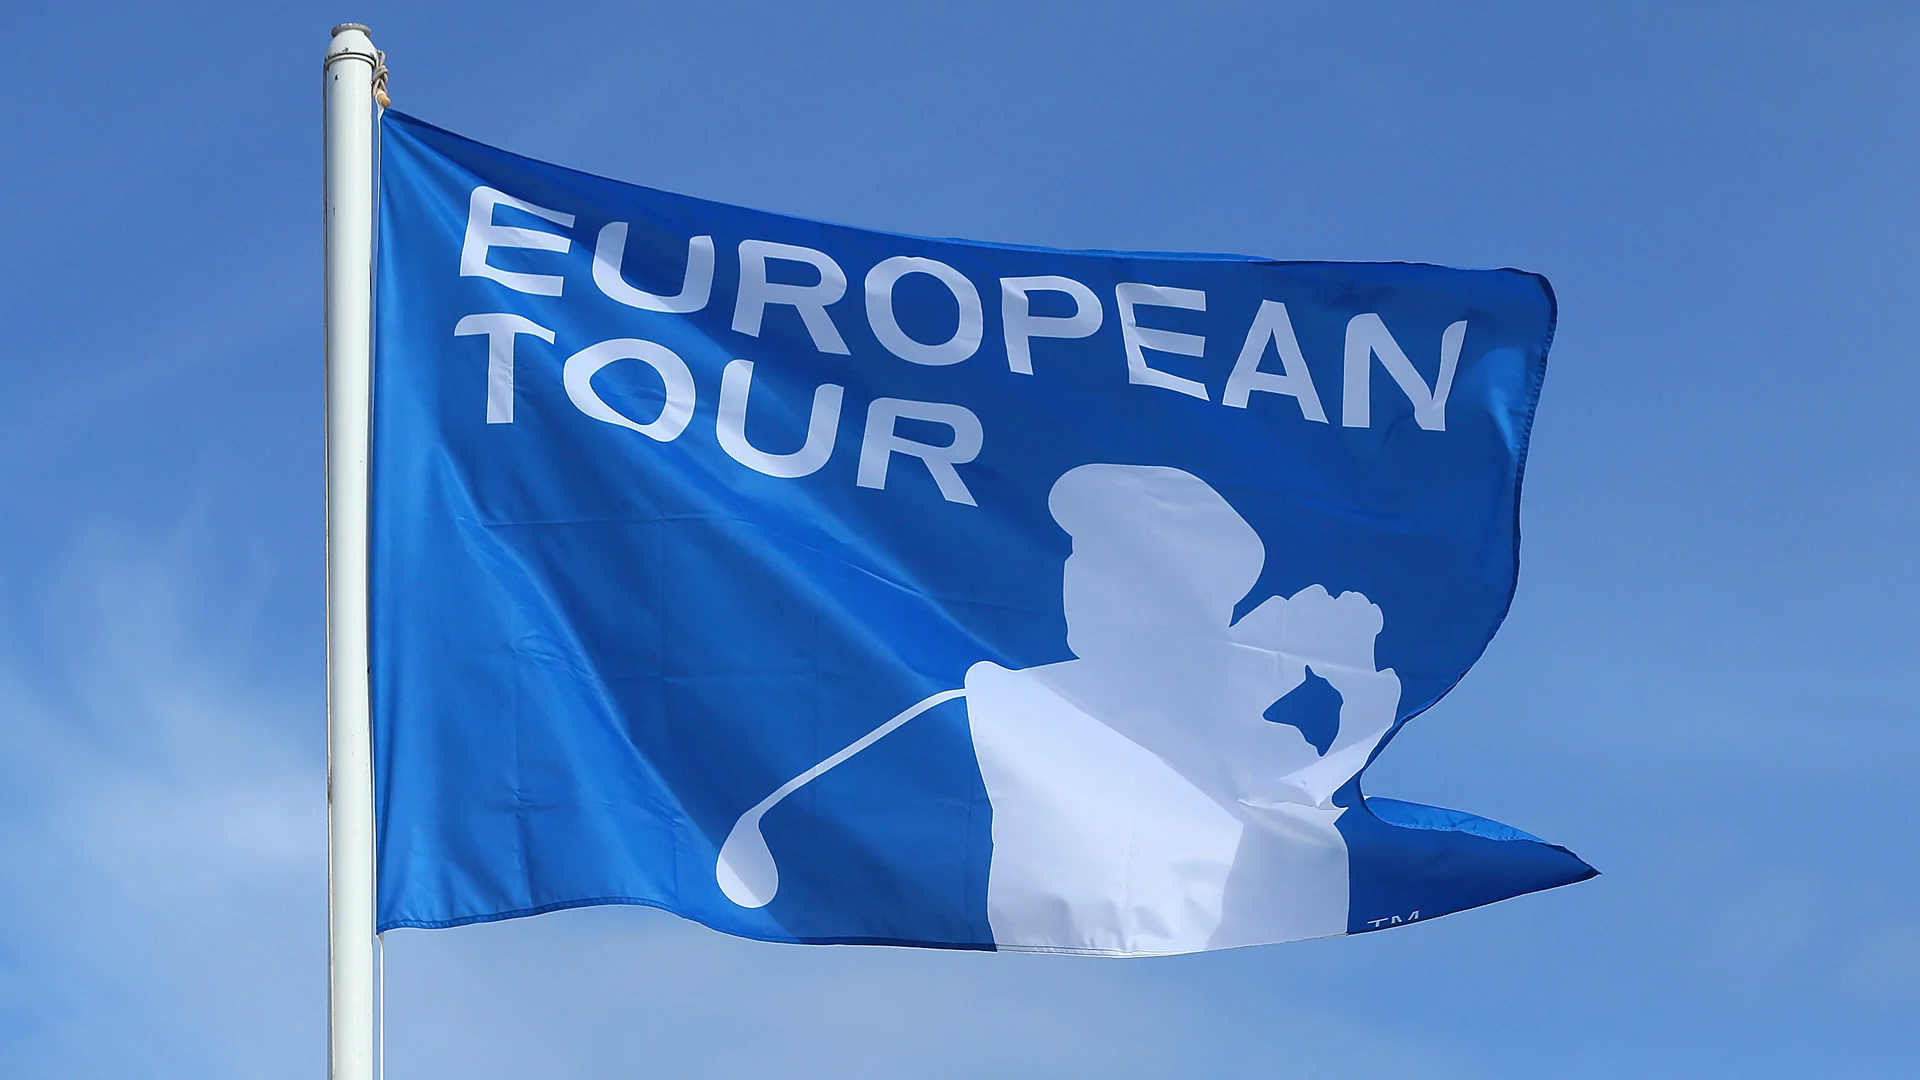 Lots of change to 2019 European Tour schedule